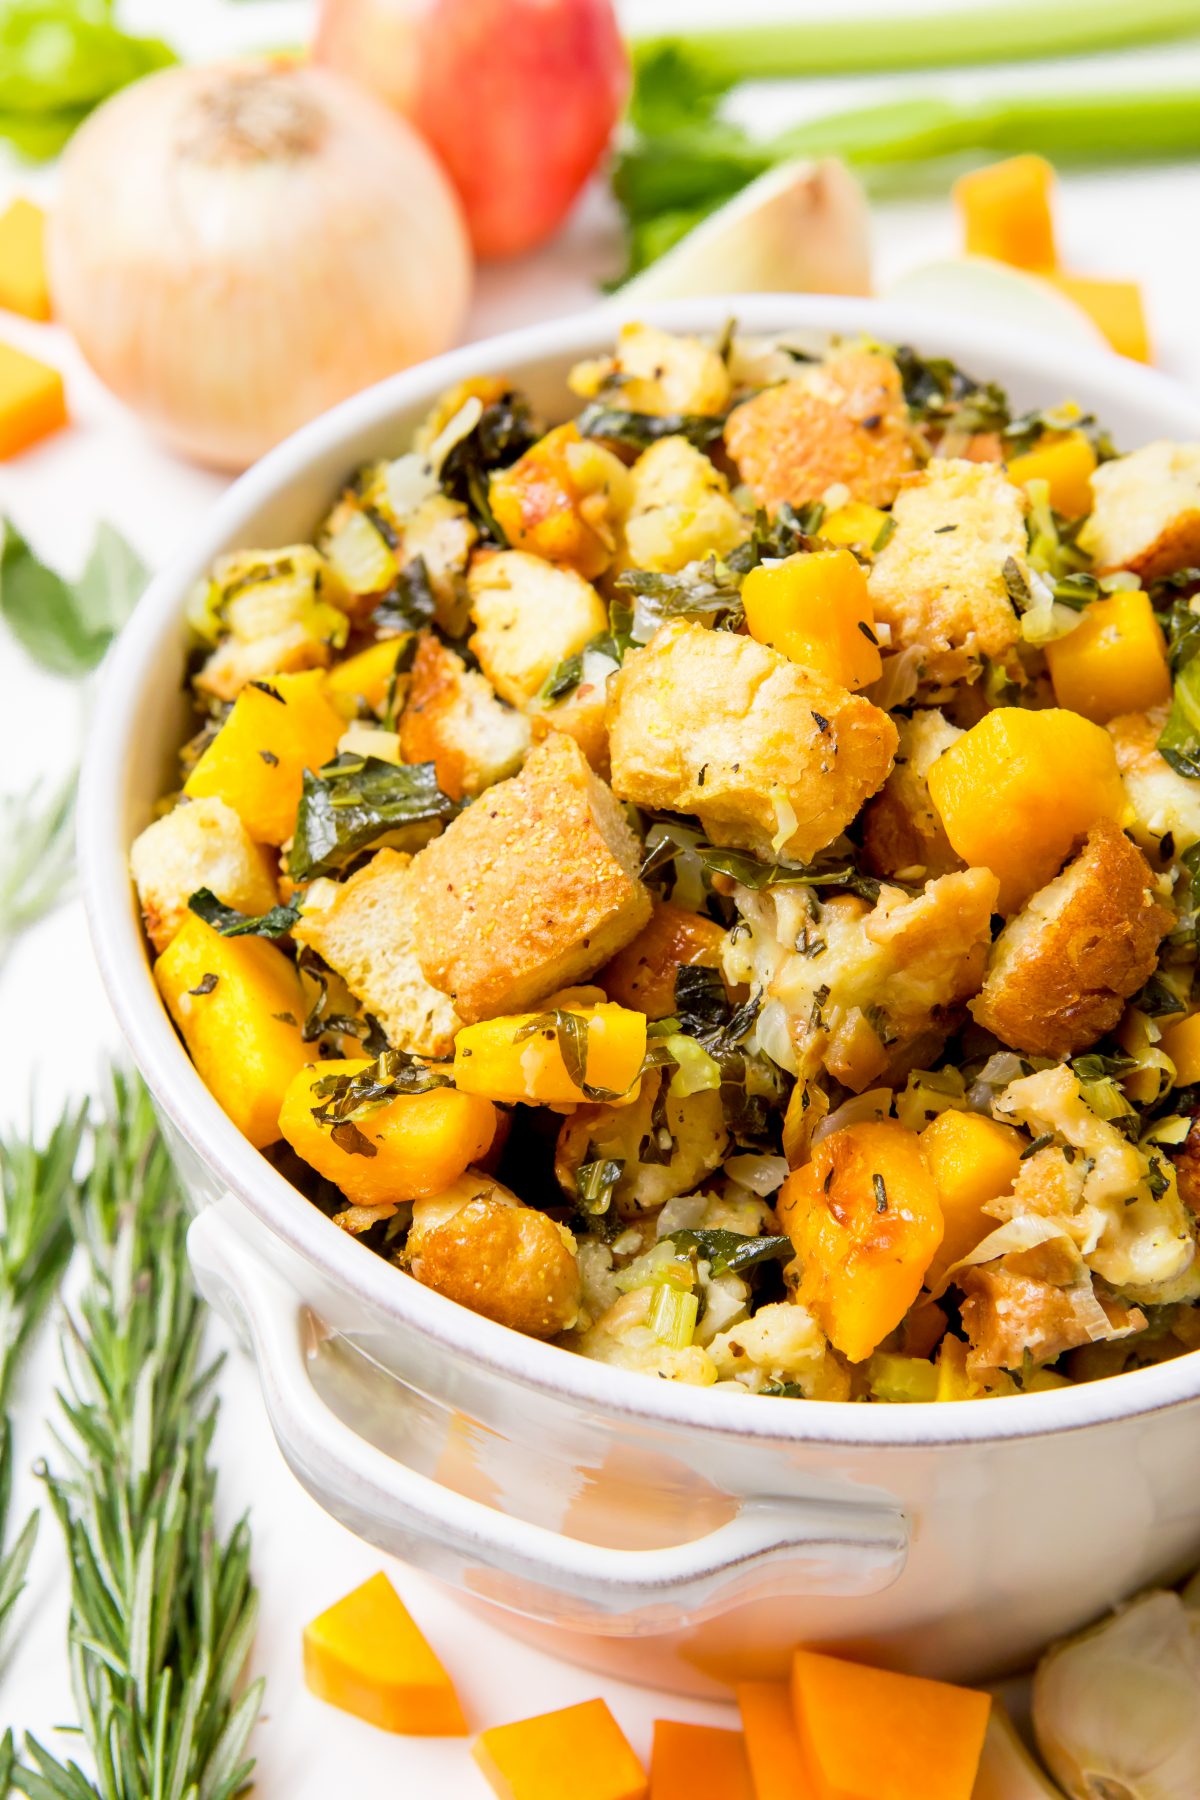 Delectable savory stuffing